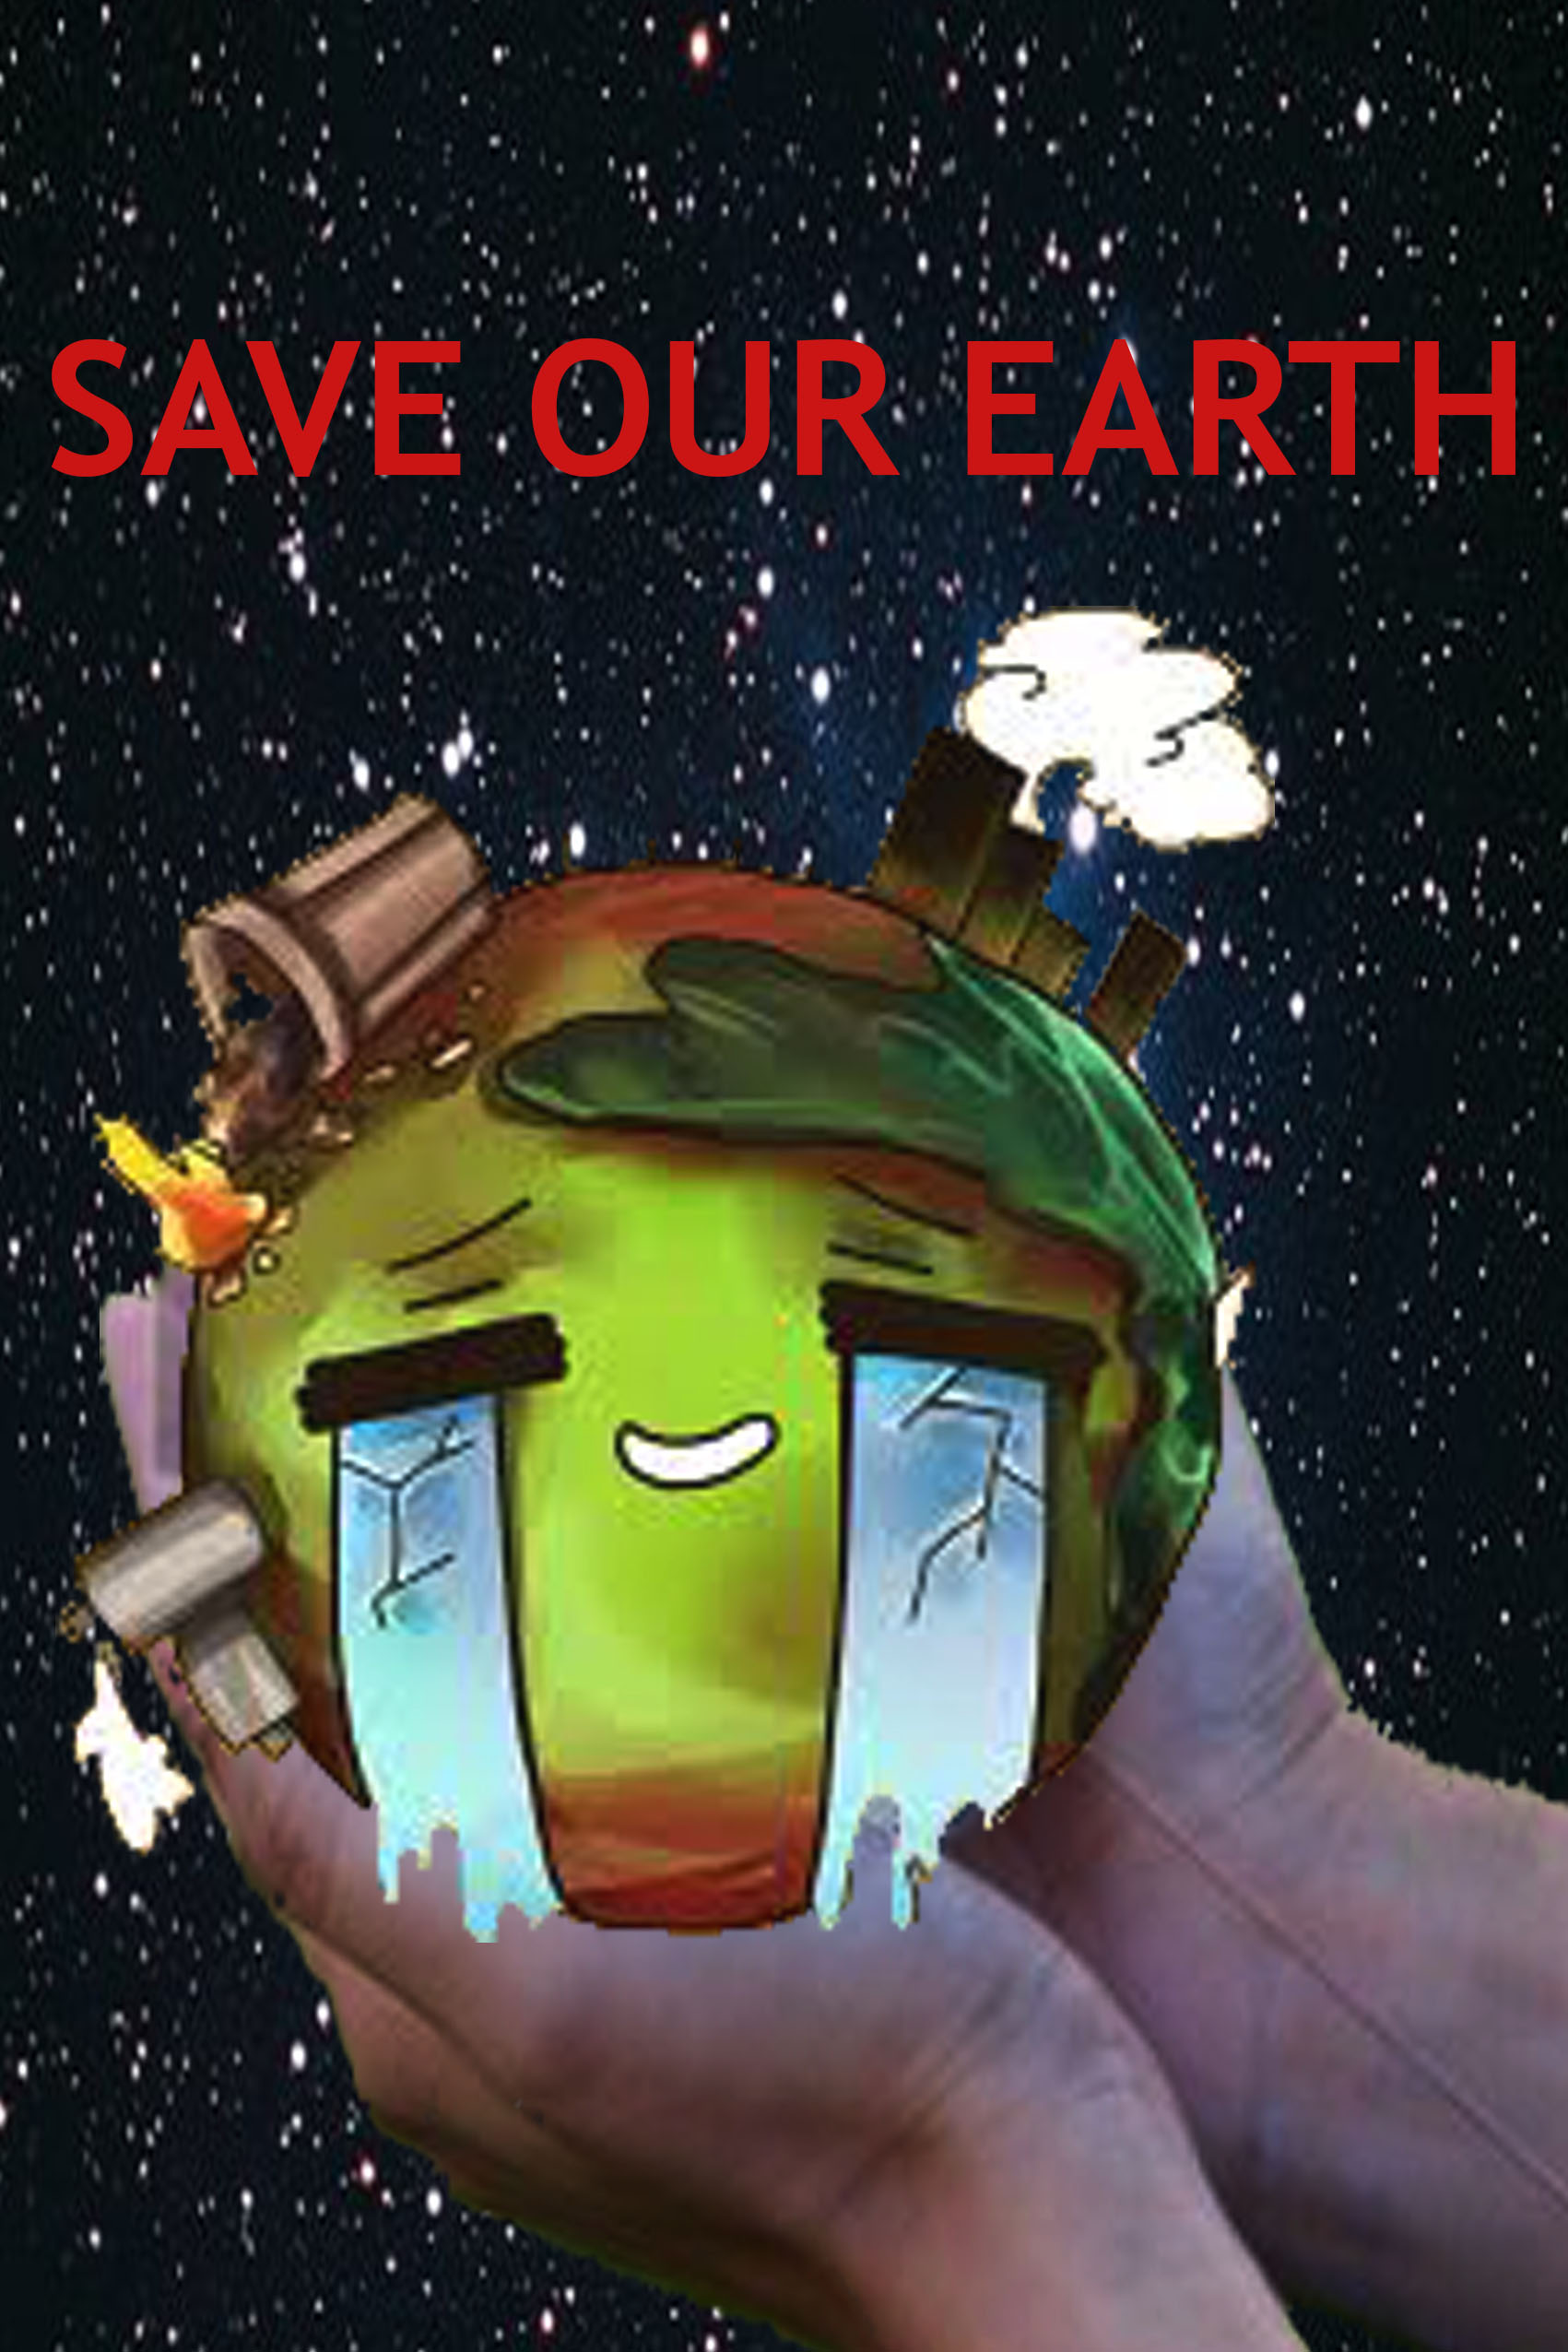 Save Our Earth Poster by Ghina98 on DeviantArt